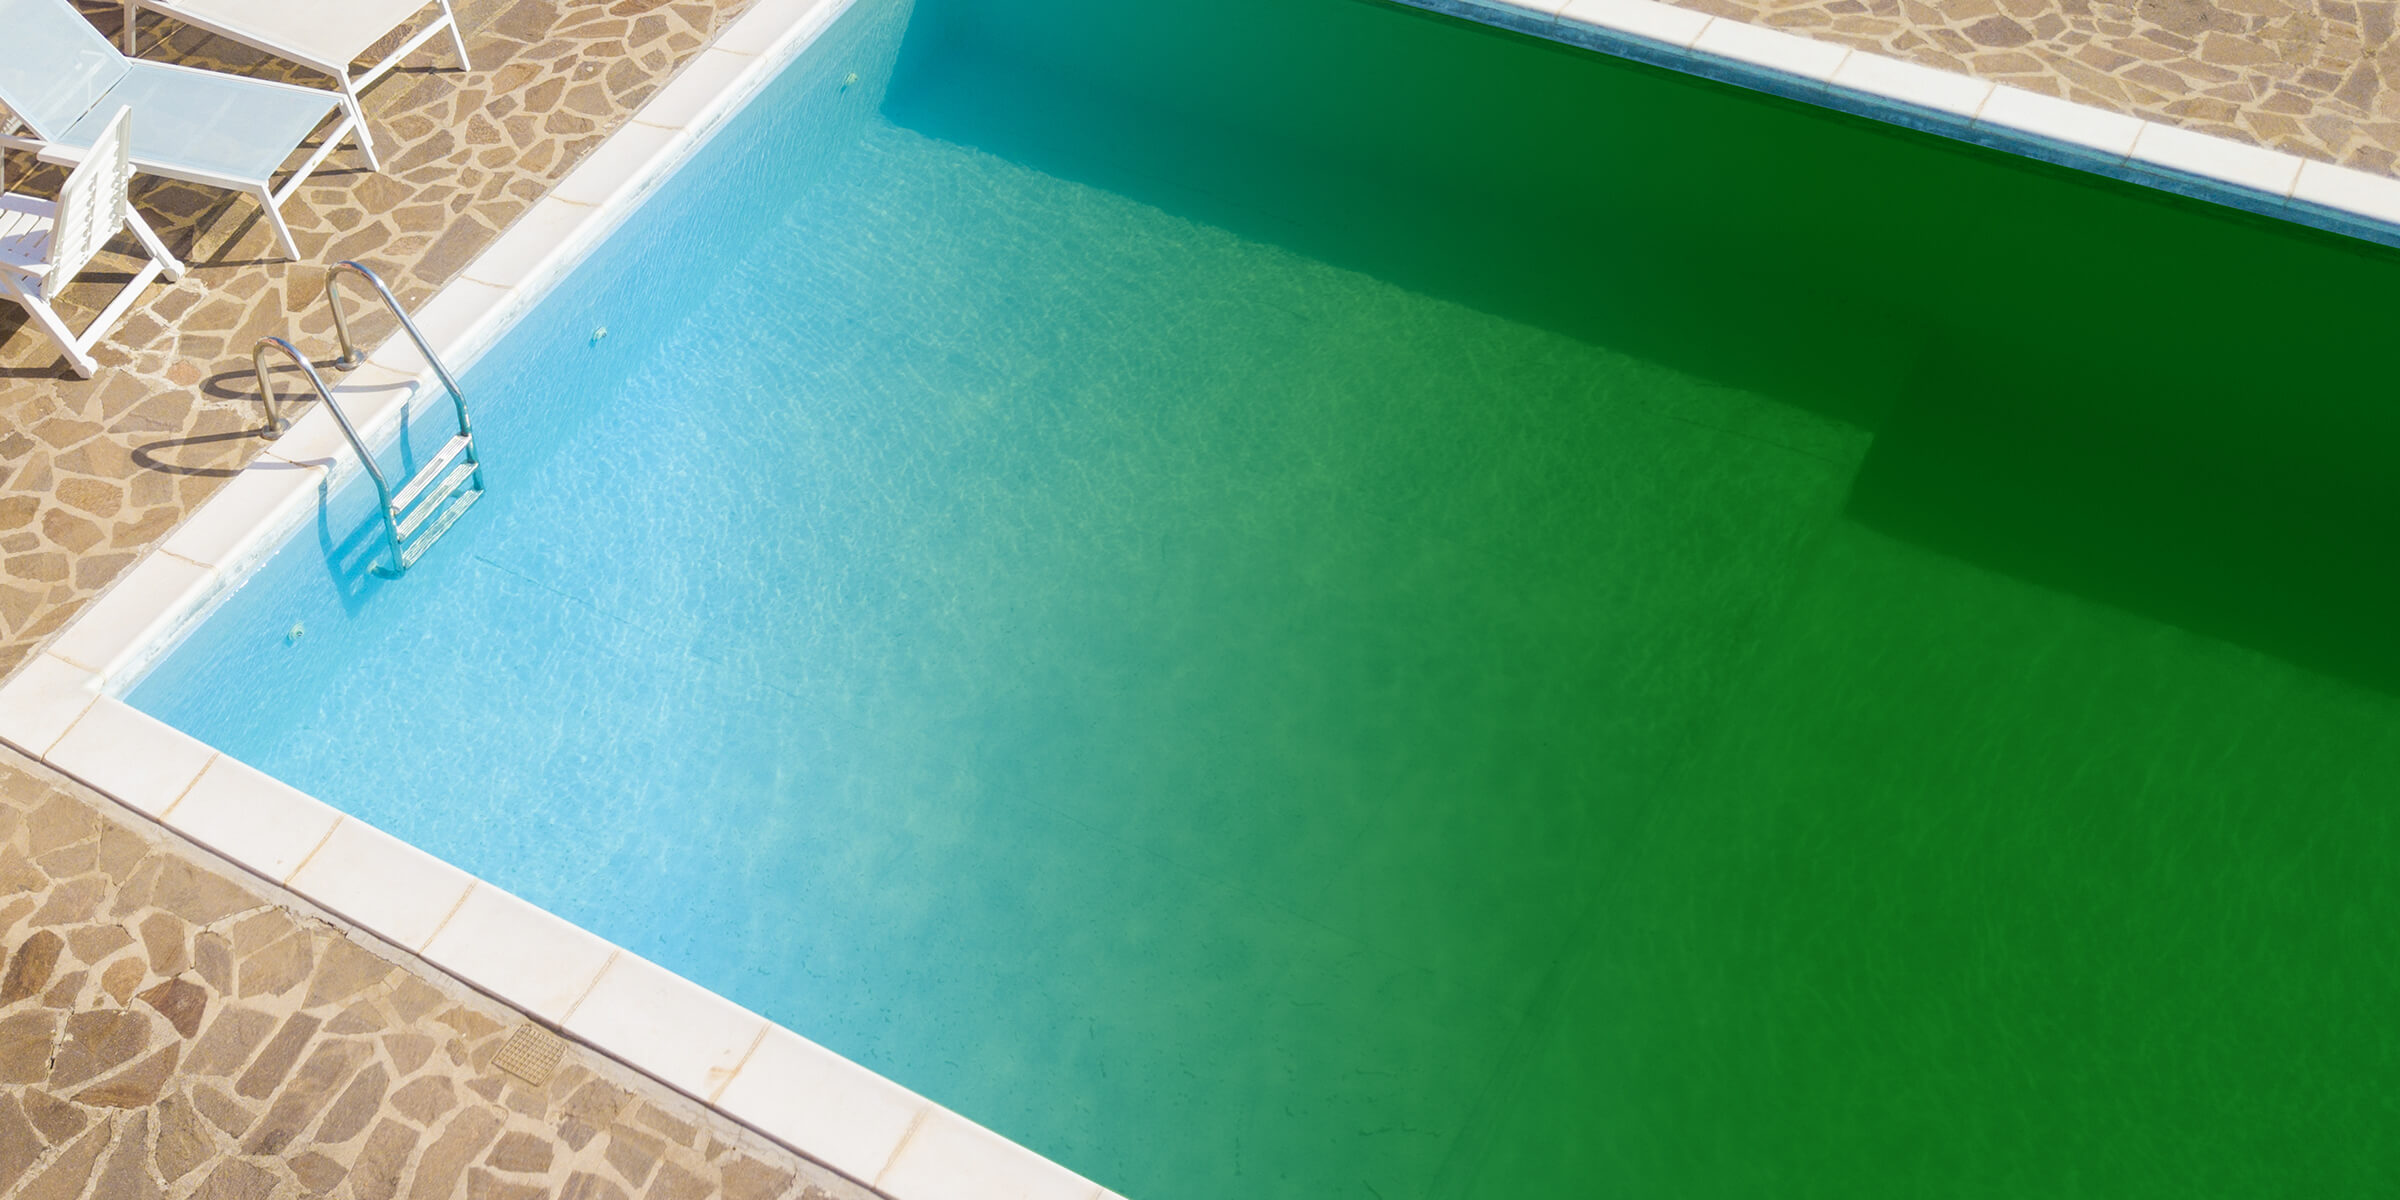 Green Pool Fix: If my Pool is Green, What Do I Do? - Hyclor